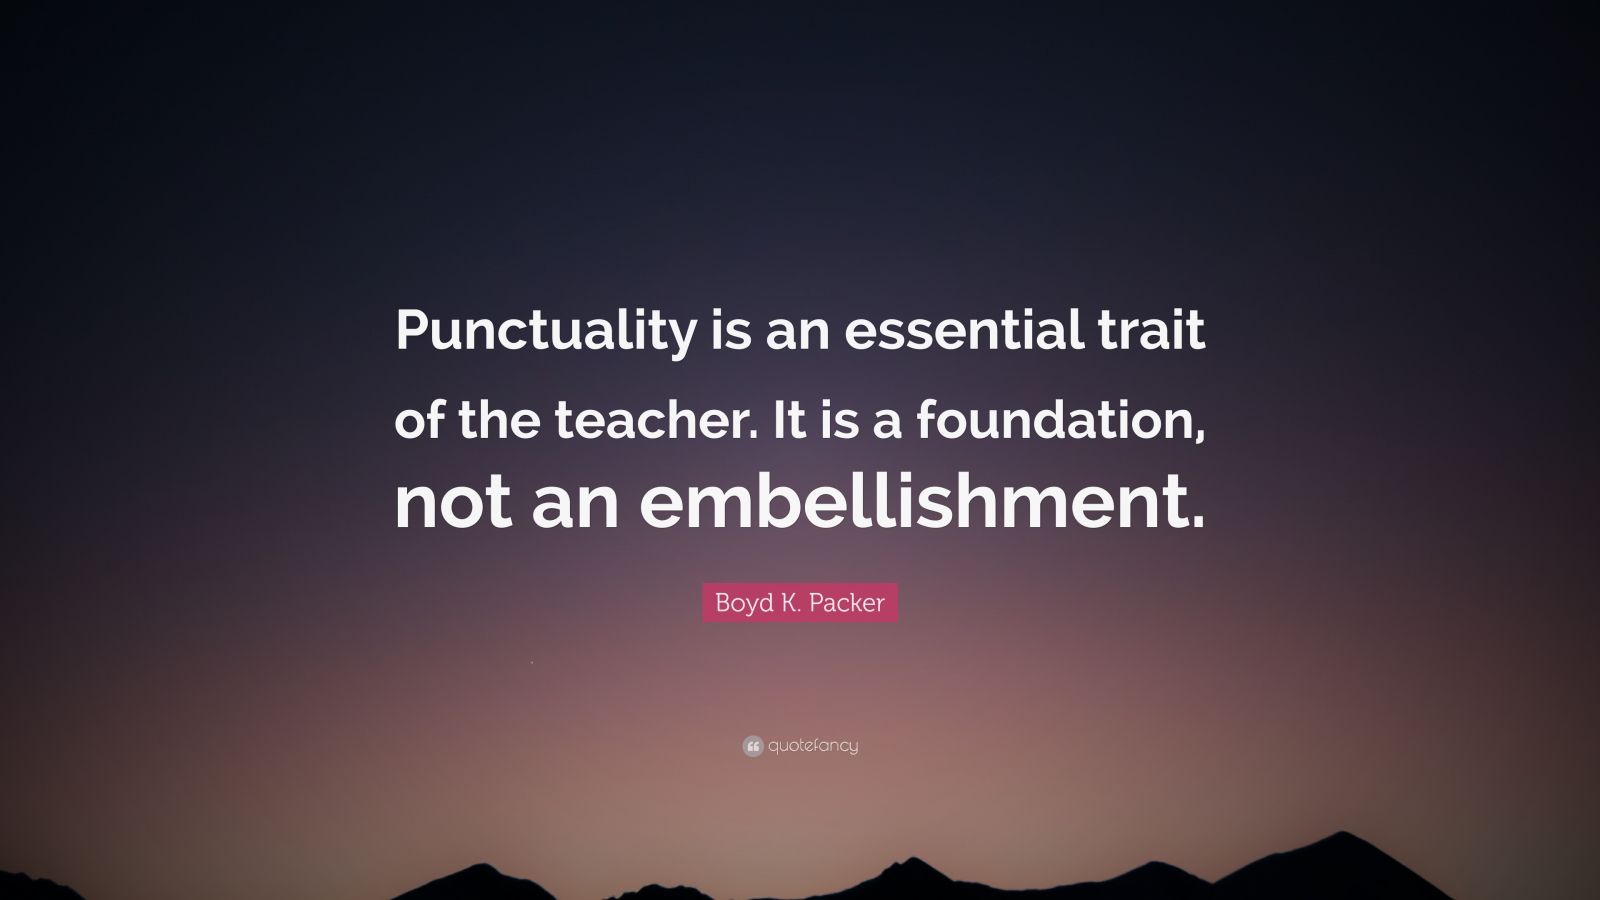 Boyd K. Packer Quote: “Punctuality is an essential trait of the teacher